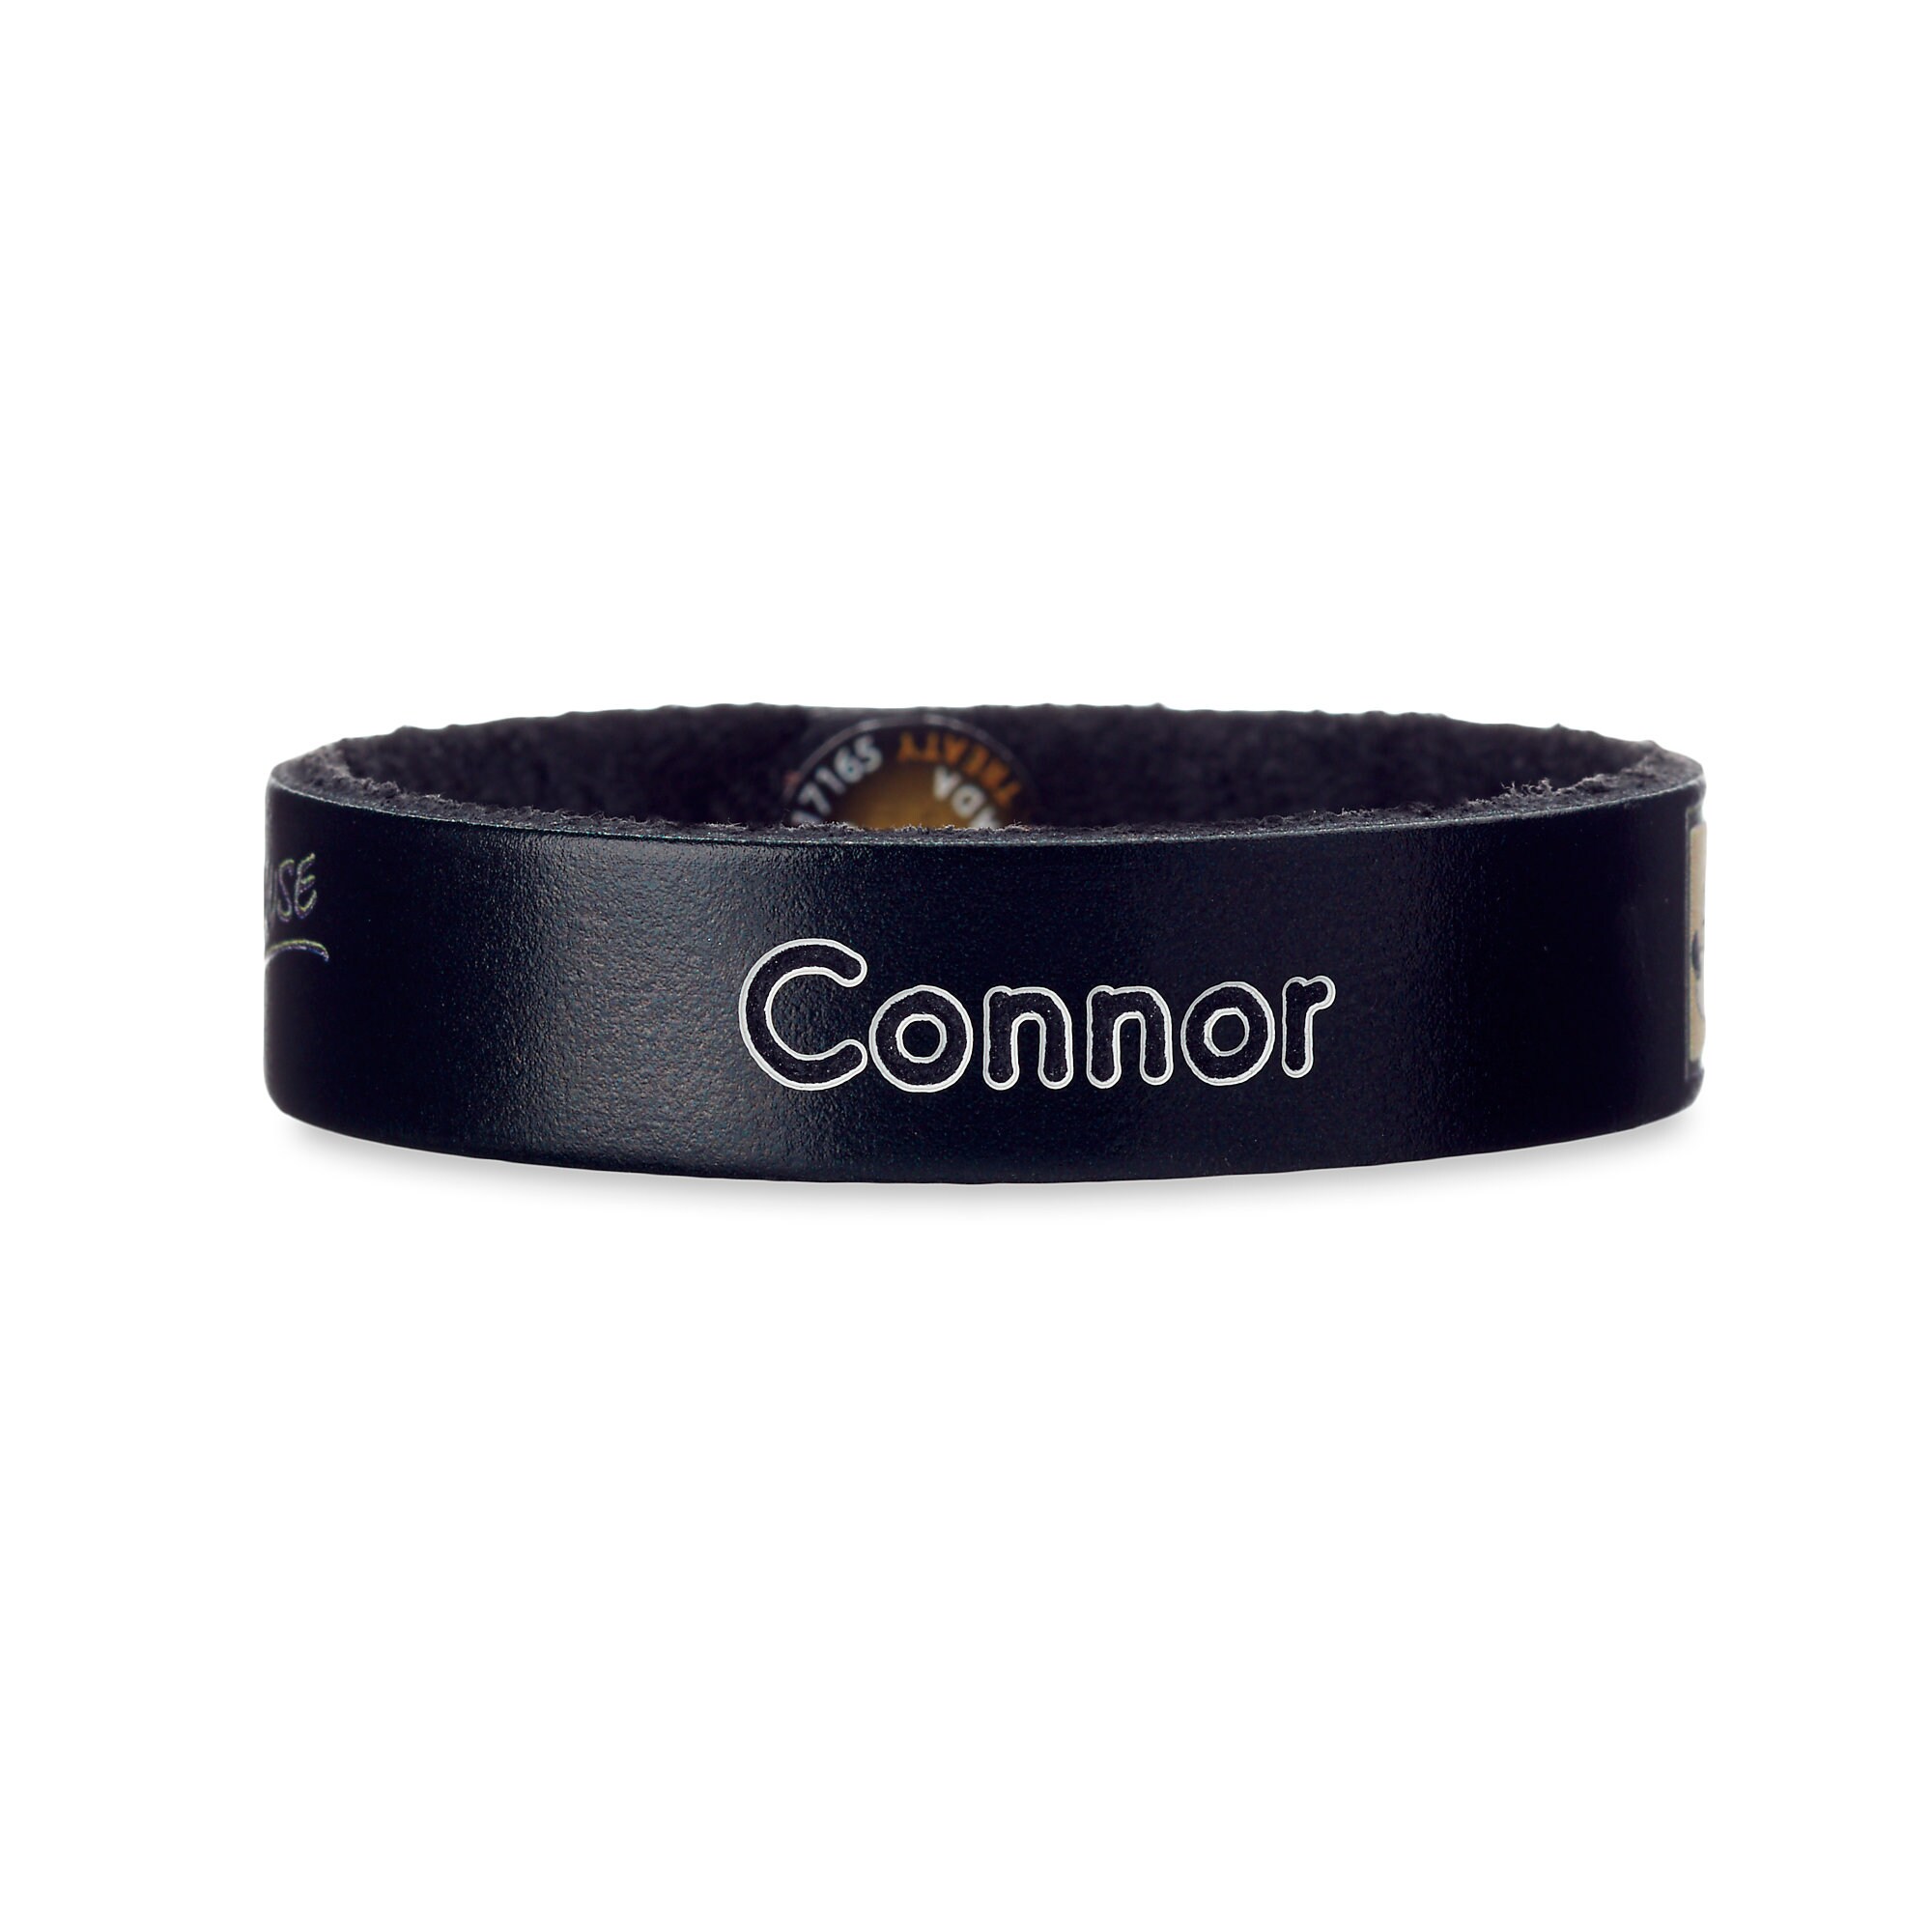 Mickey Mouse Comic Leather Bracelet - Personalizable